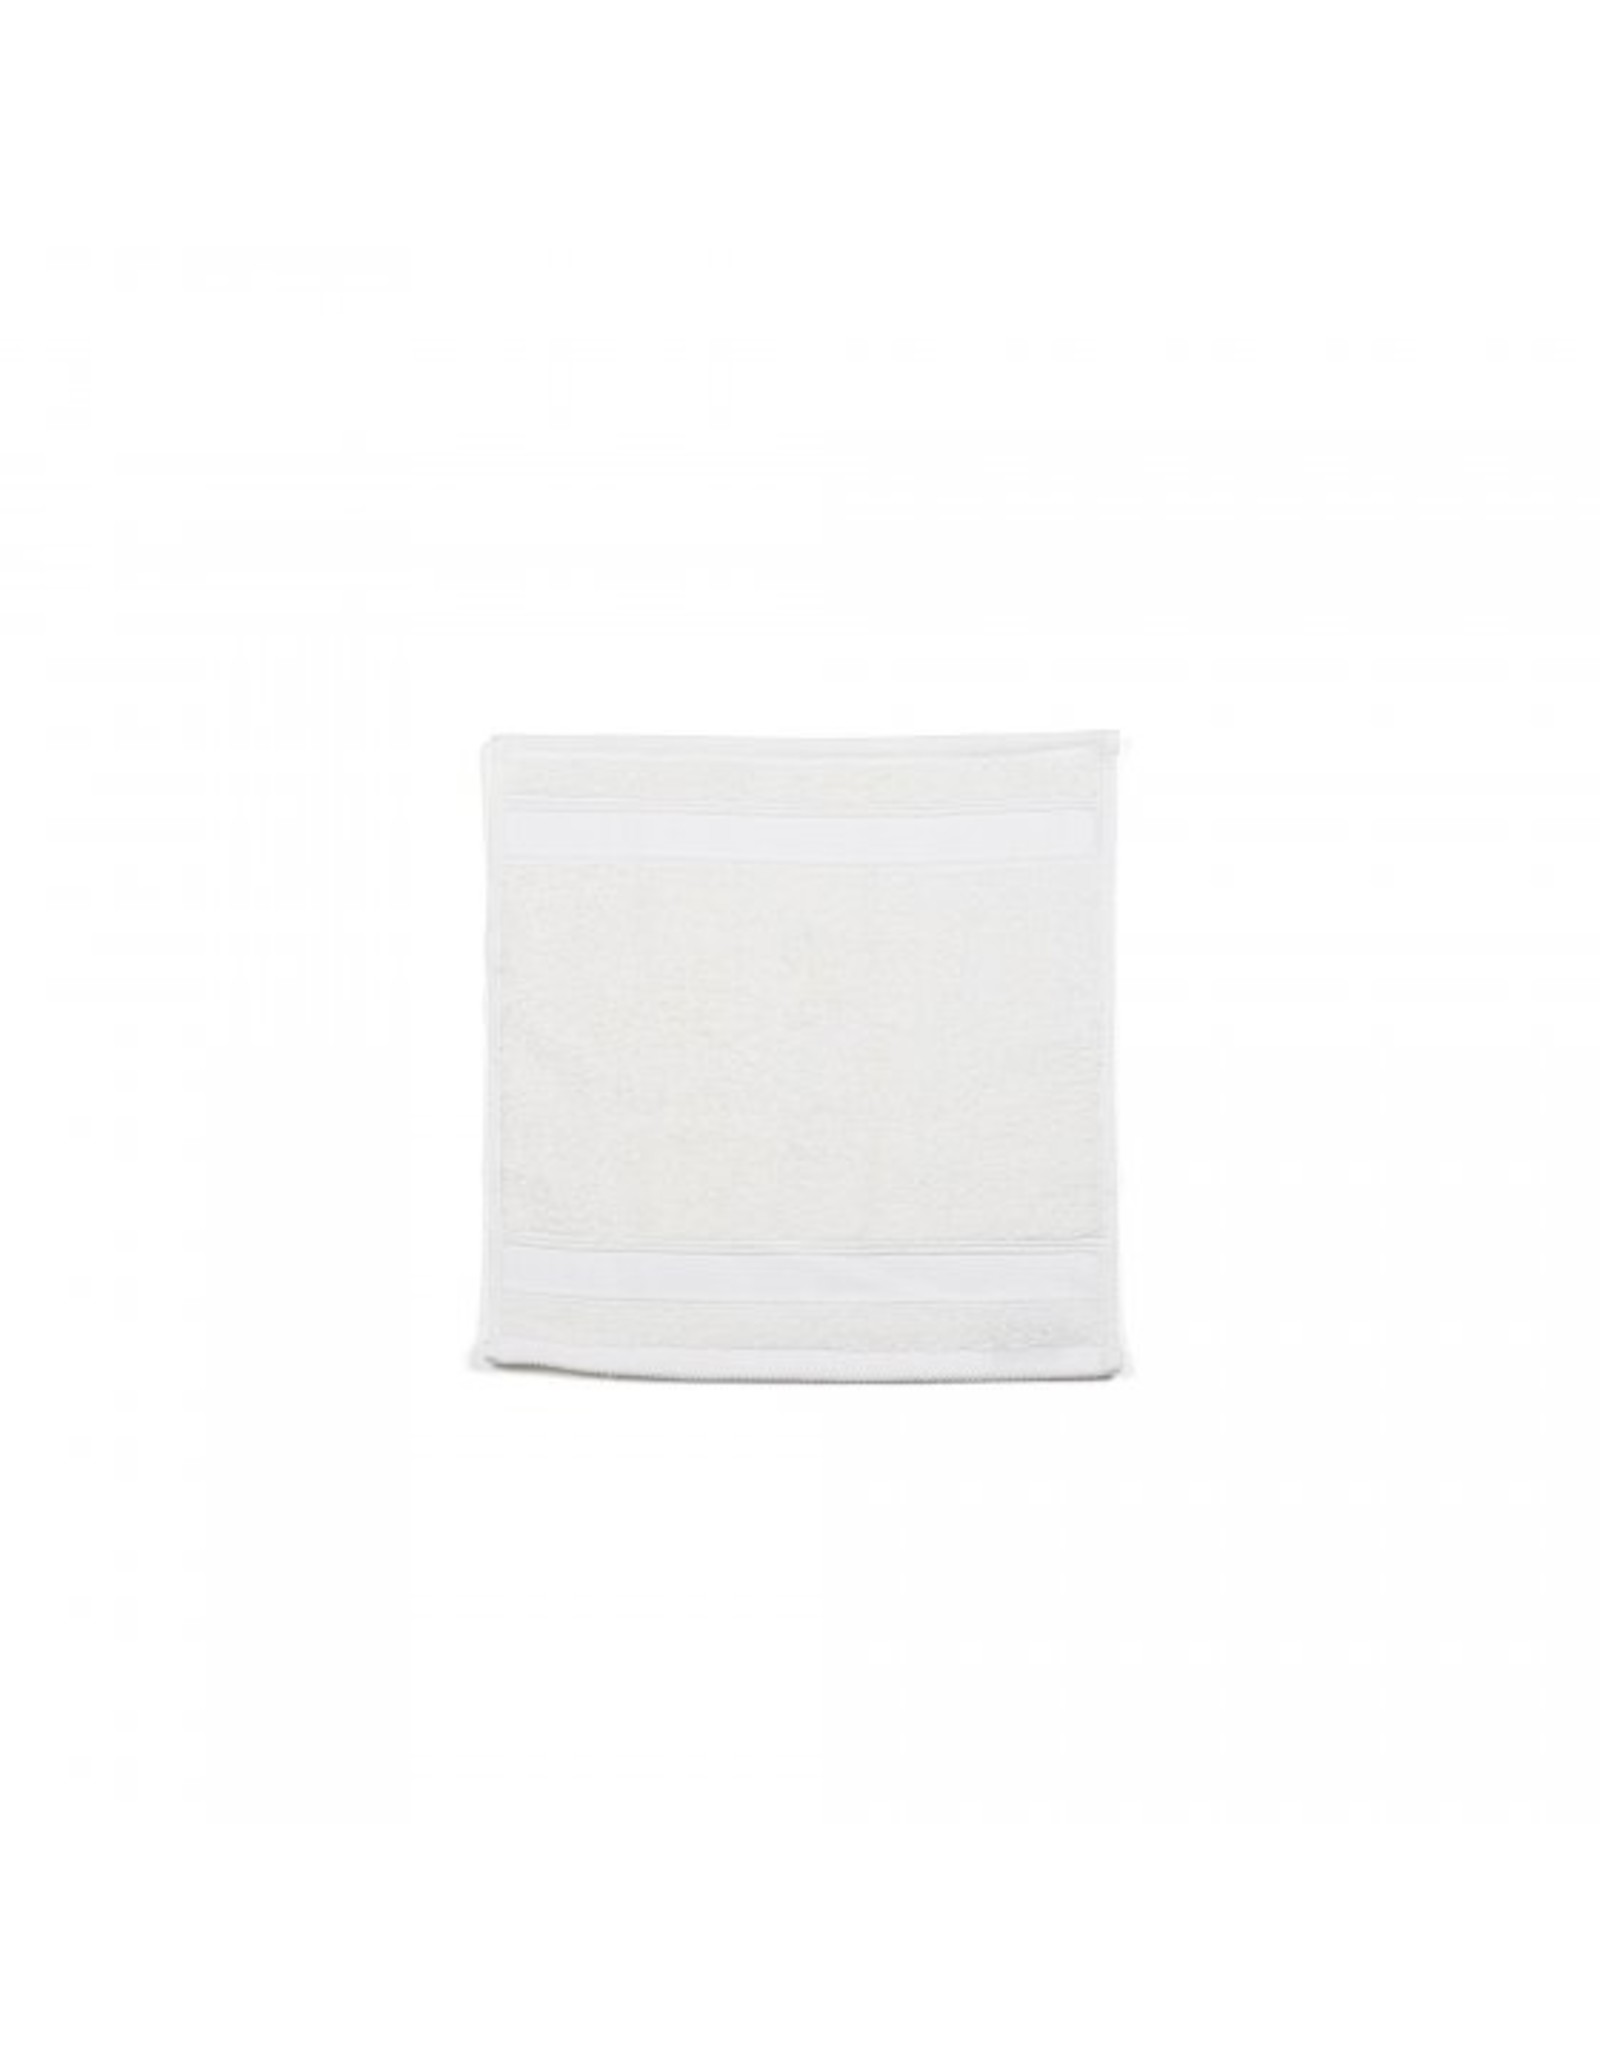 Simi Optic White Wash Cloth 12x12 - The Collector's House